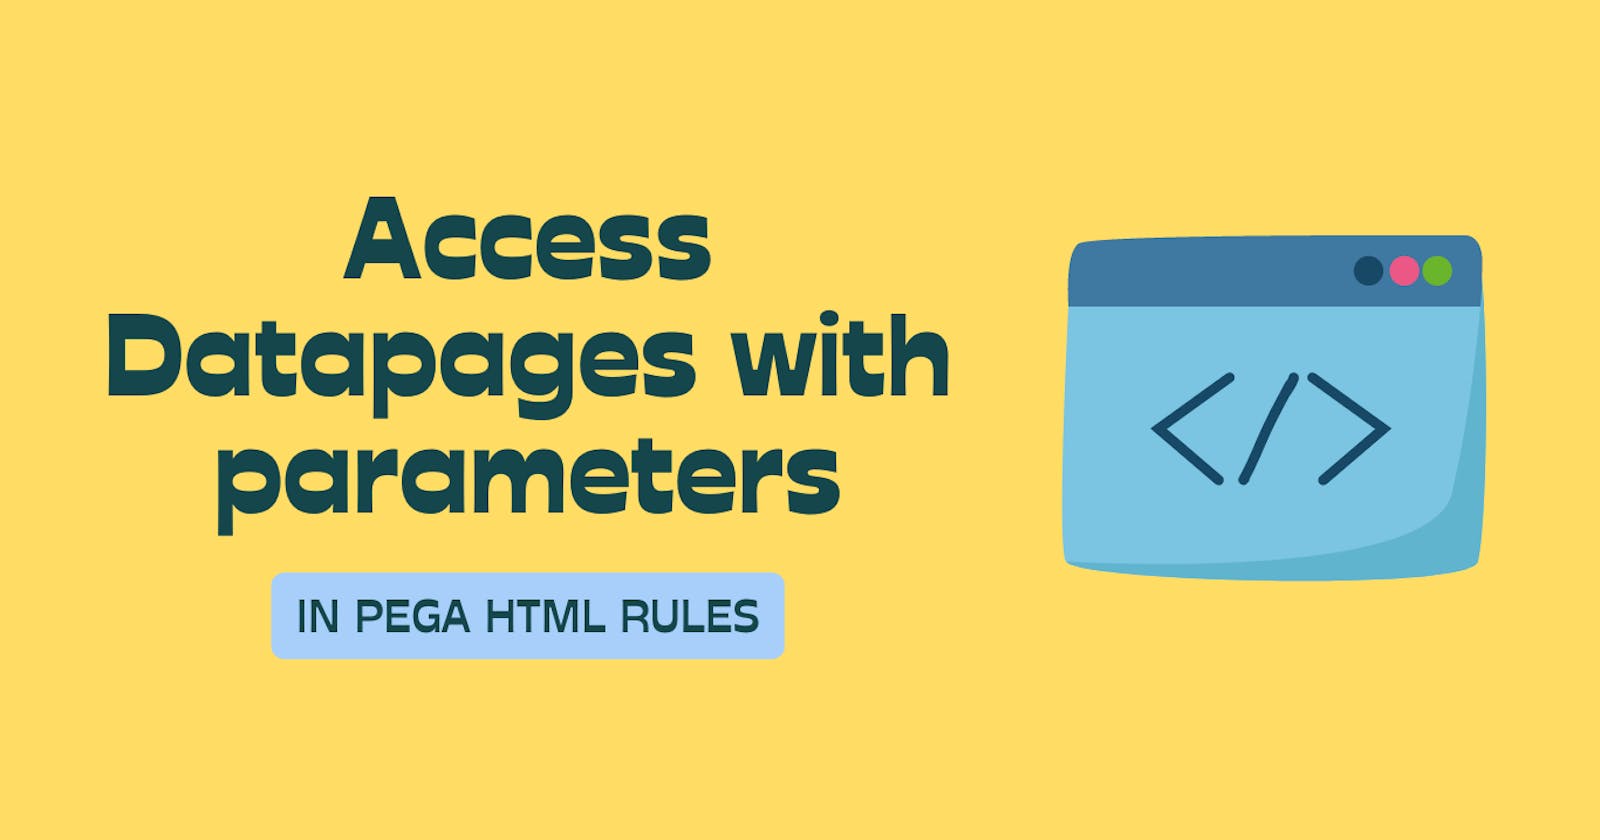 Refer datapage with parameters in HTML rule